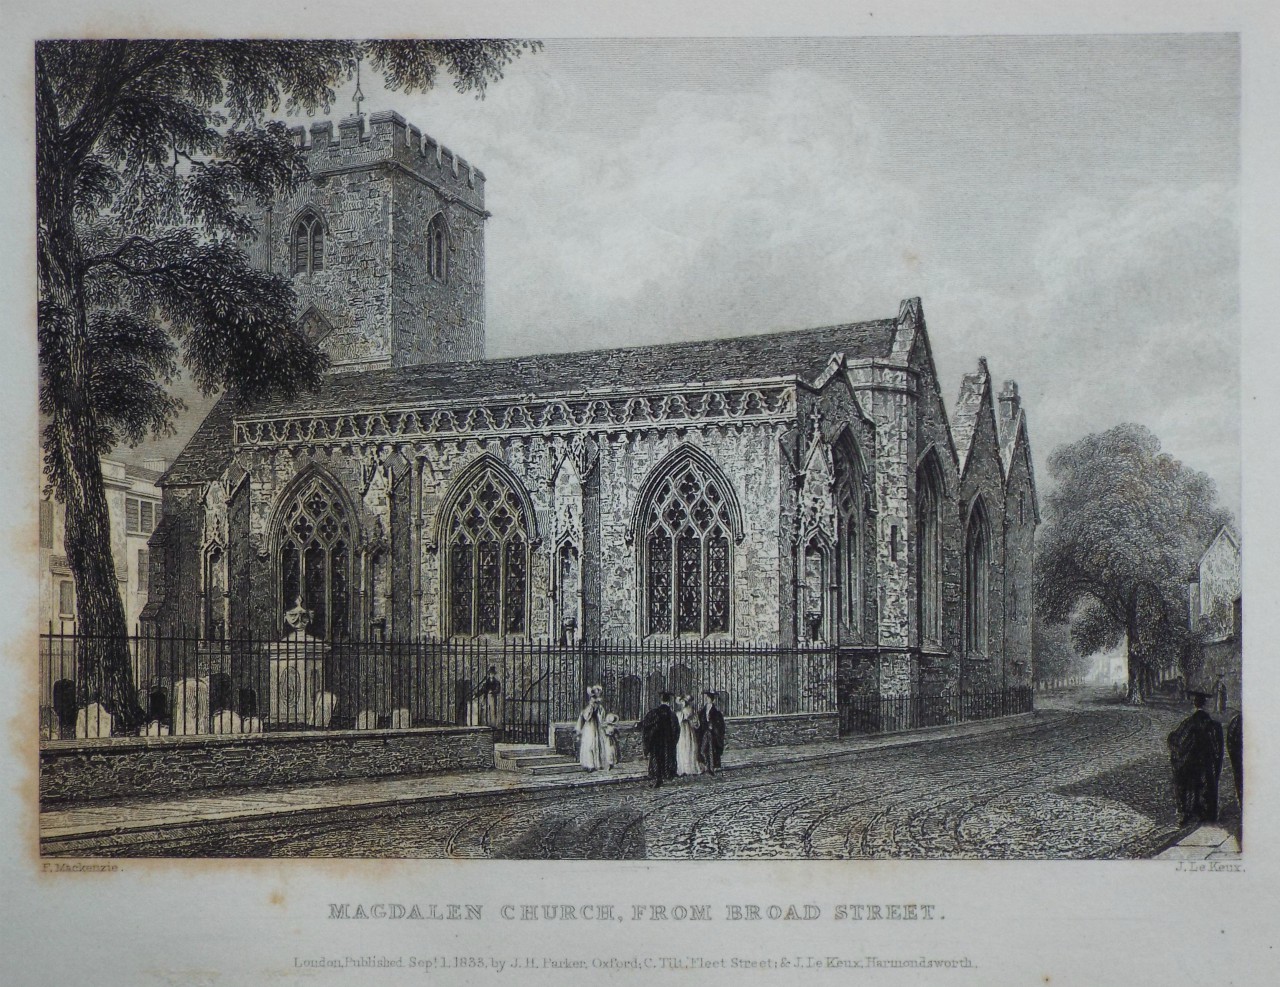 Print - Magdalen Church, from Broad Street. - Le